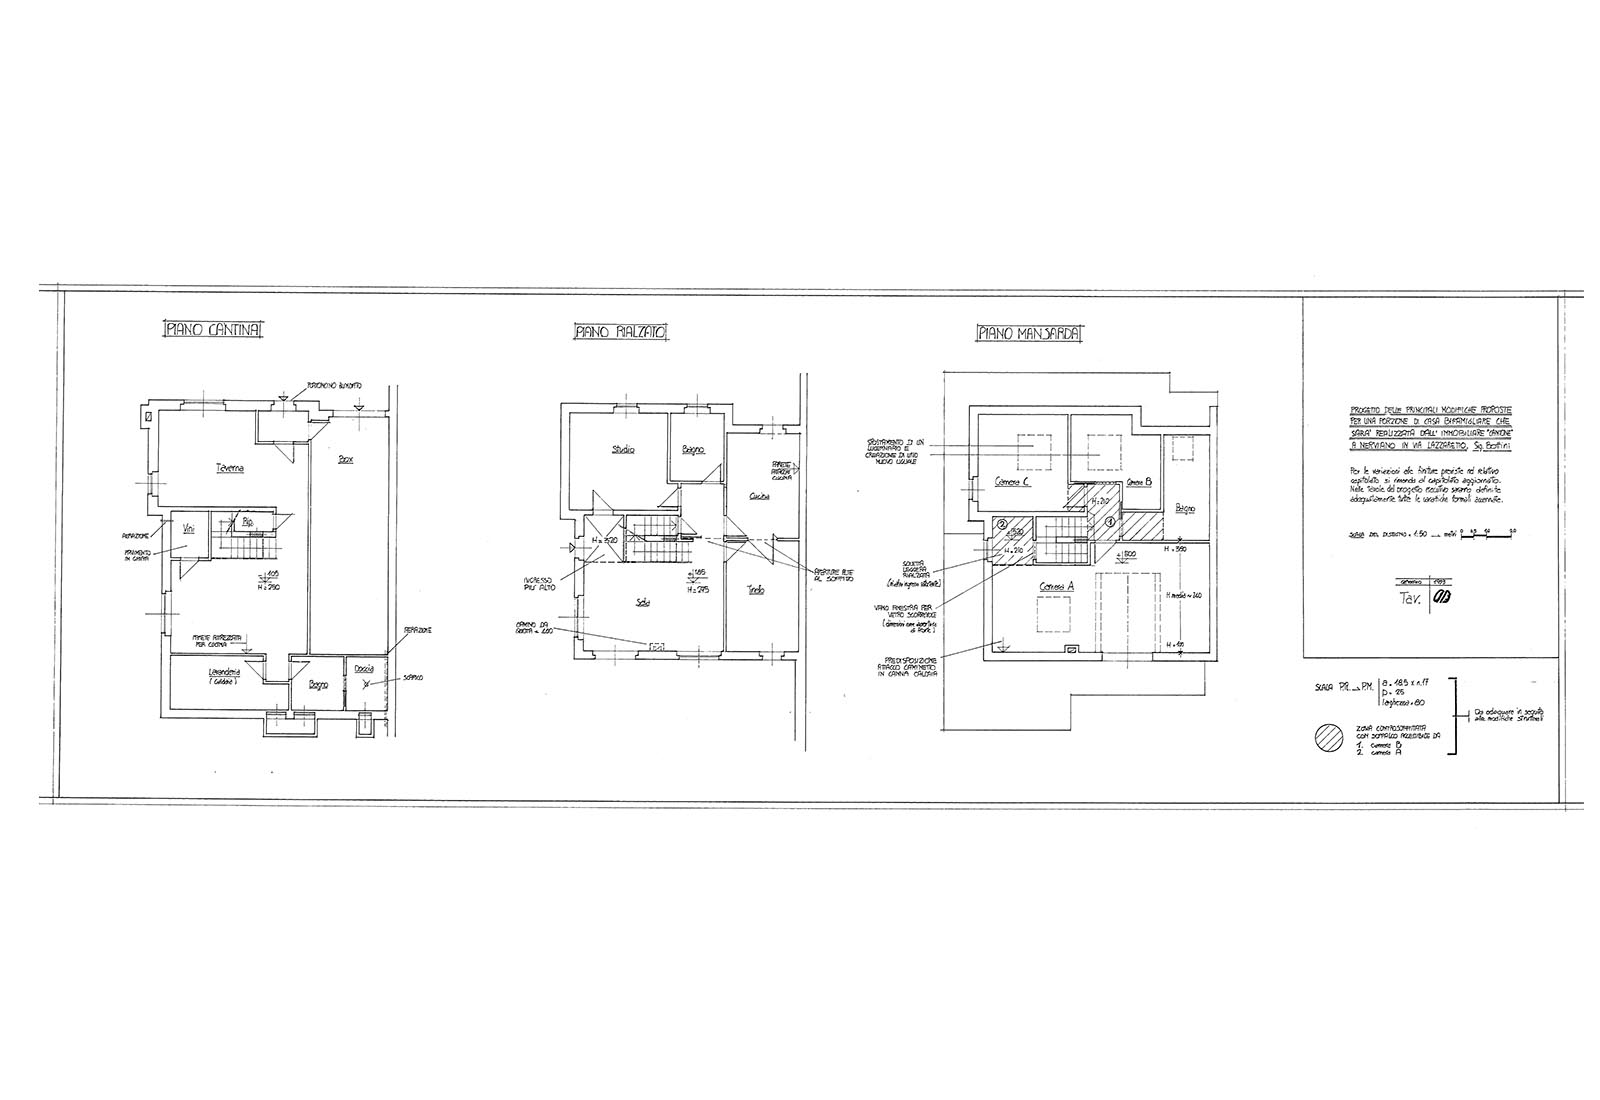 House interior renovation in Nerviano - Main proposed changes